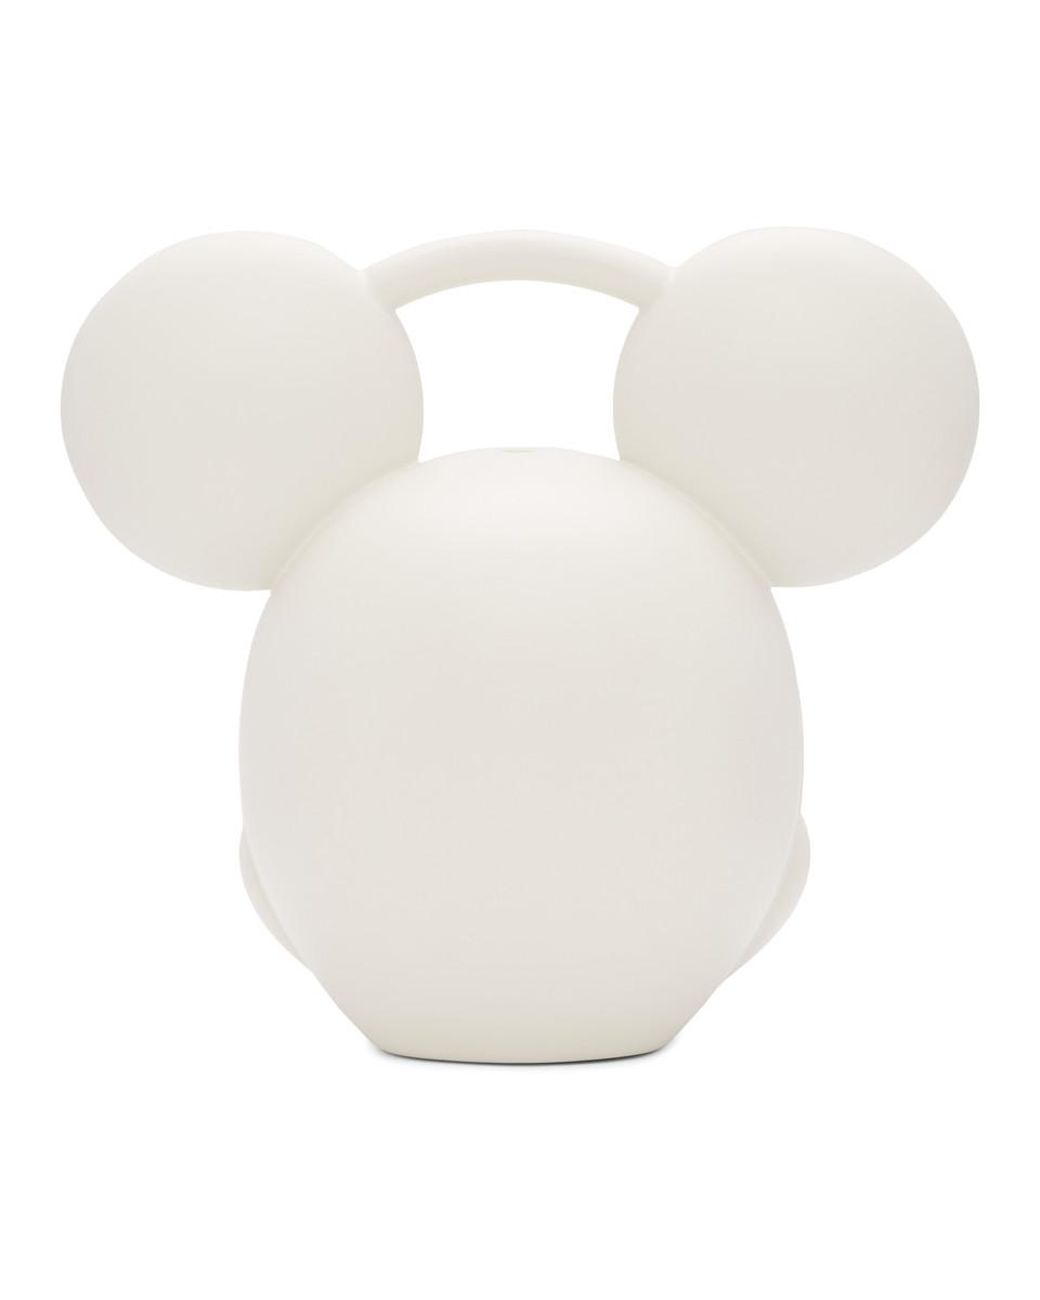 Gucci Mickey Mouse Top Handle White in Plastic - US